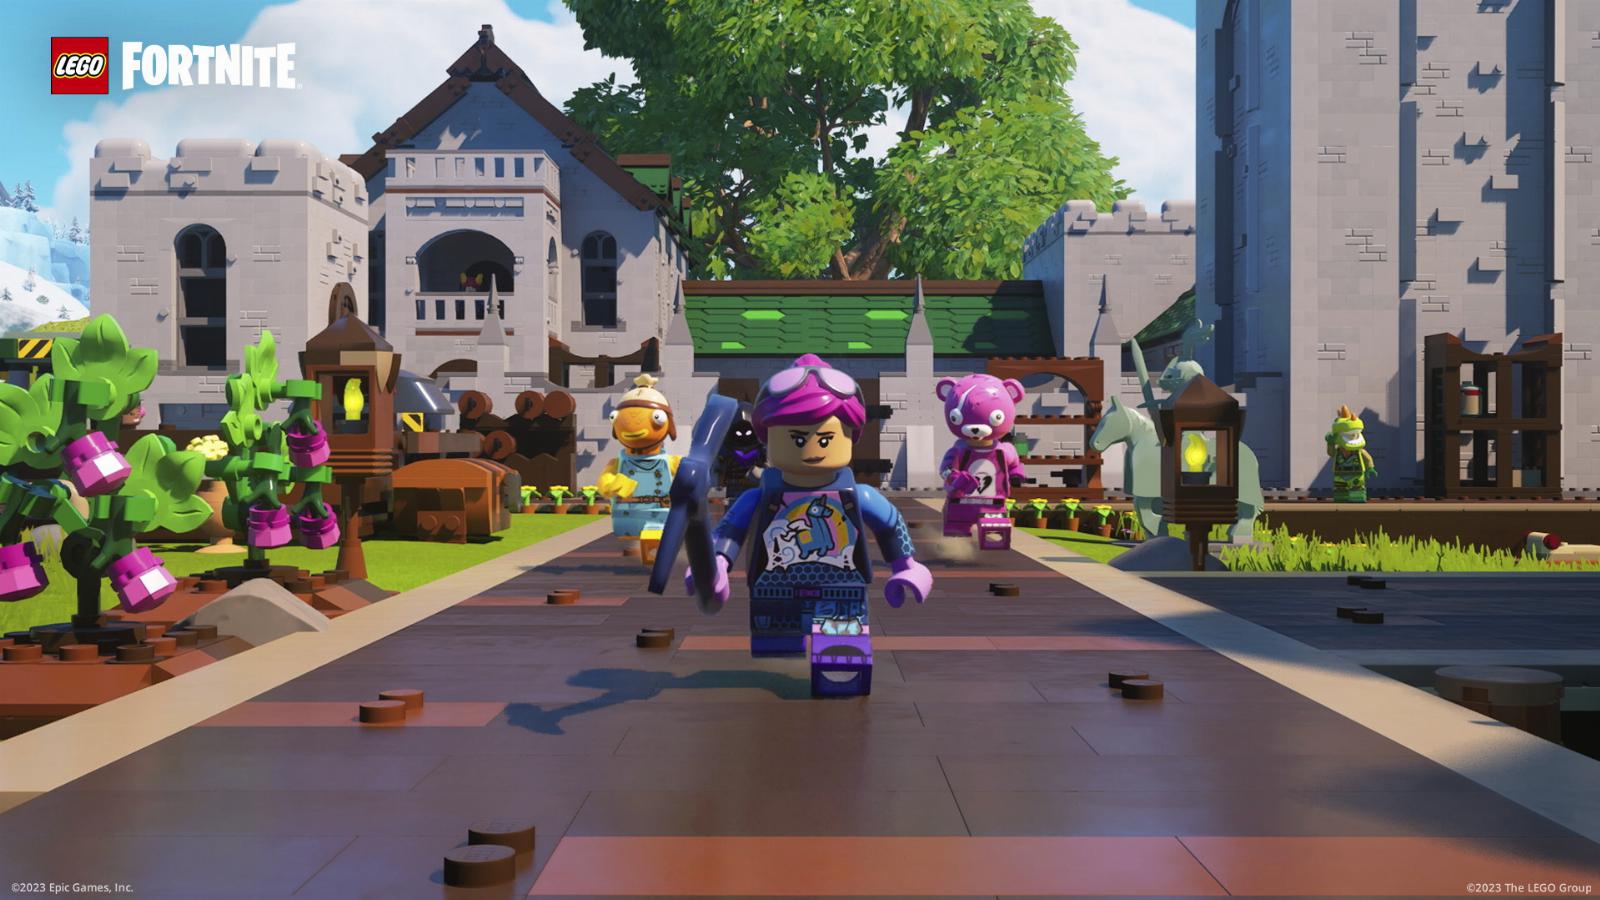 Lego Fortnite’s first big update squashes bugs and adds a launch pad